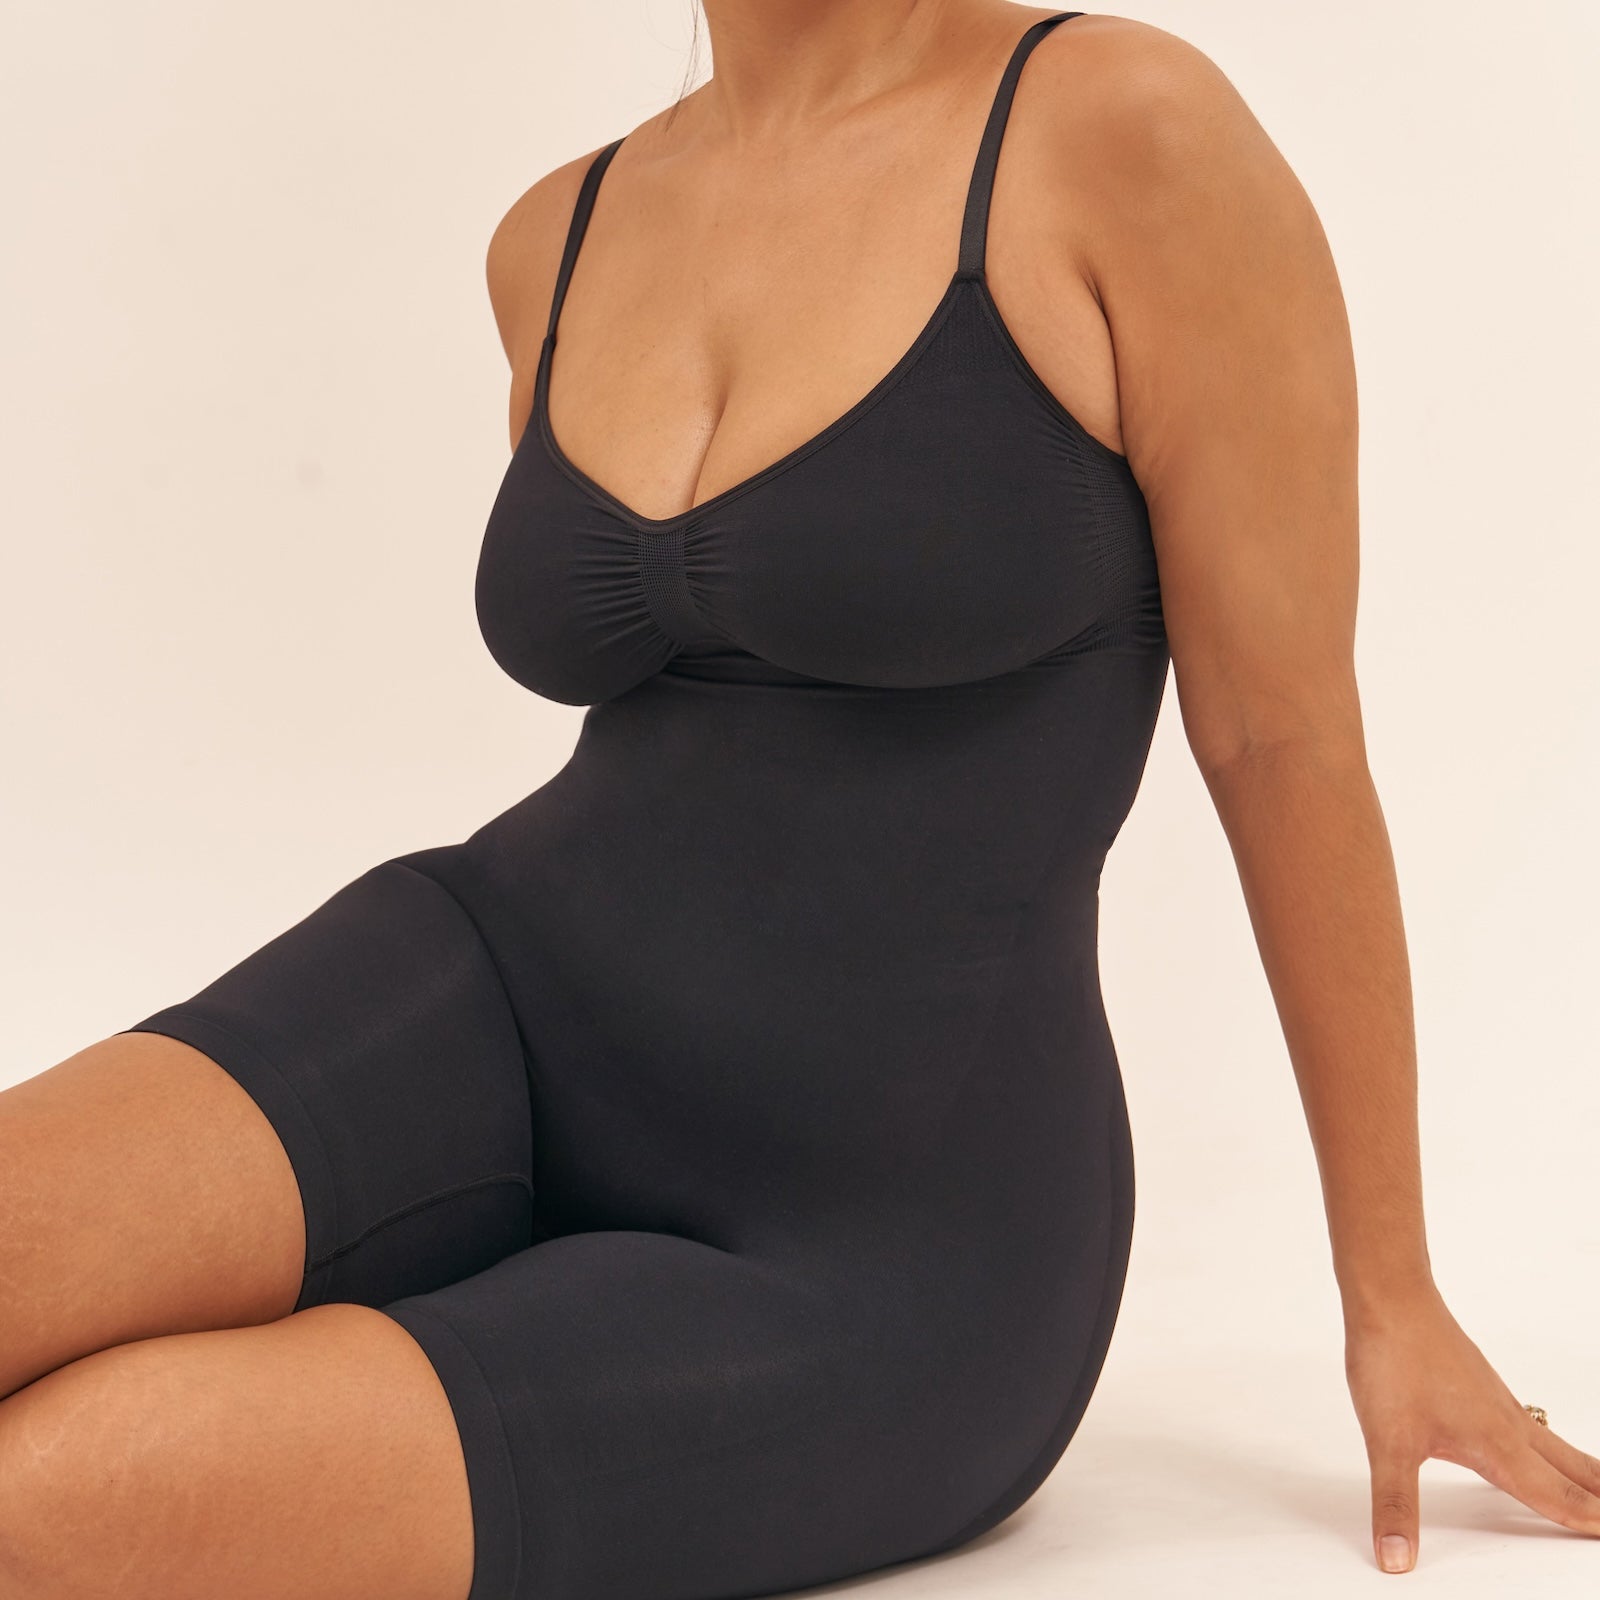 Stitches Thigh and Hip Control Shapewear Short